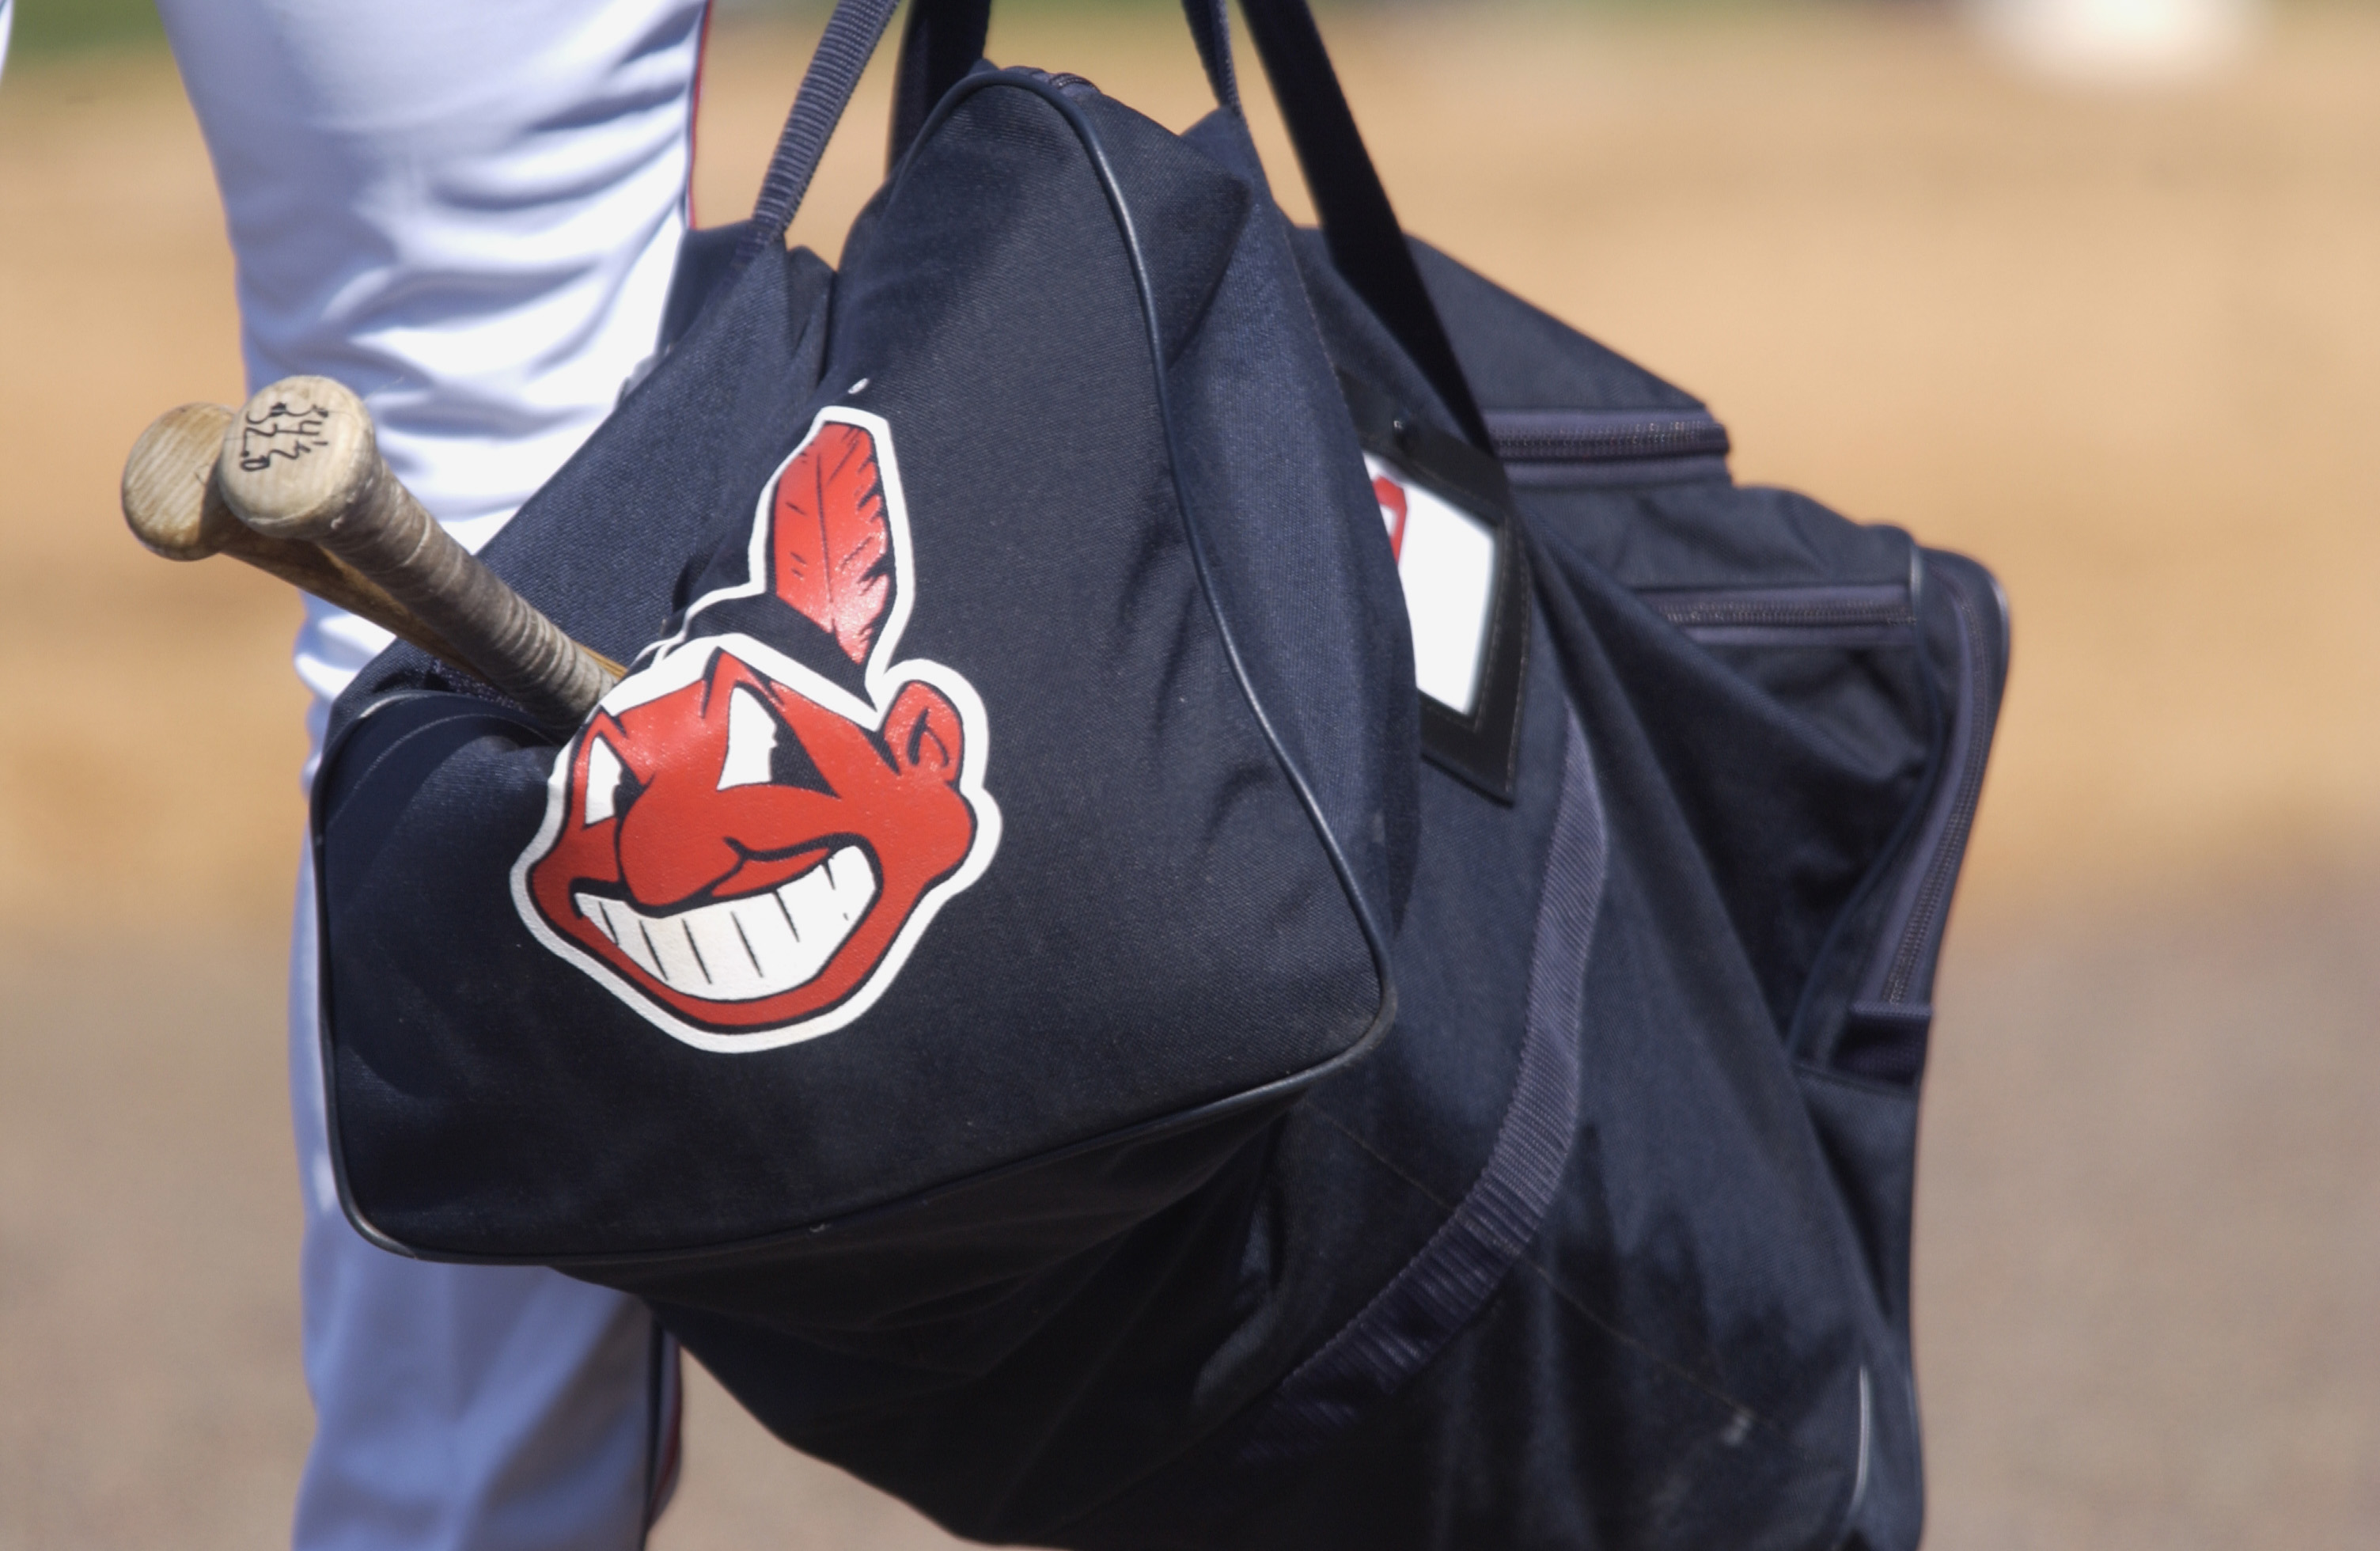 Even Ohio&#039;s biggest newspaper thinks the Cleveland Indians&#039; logo is racist